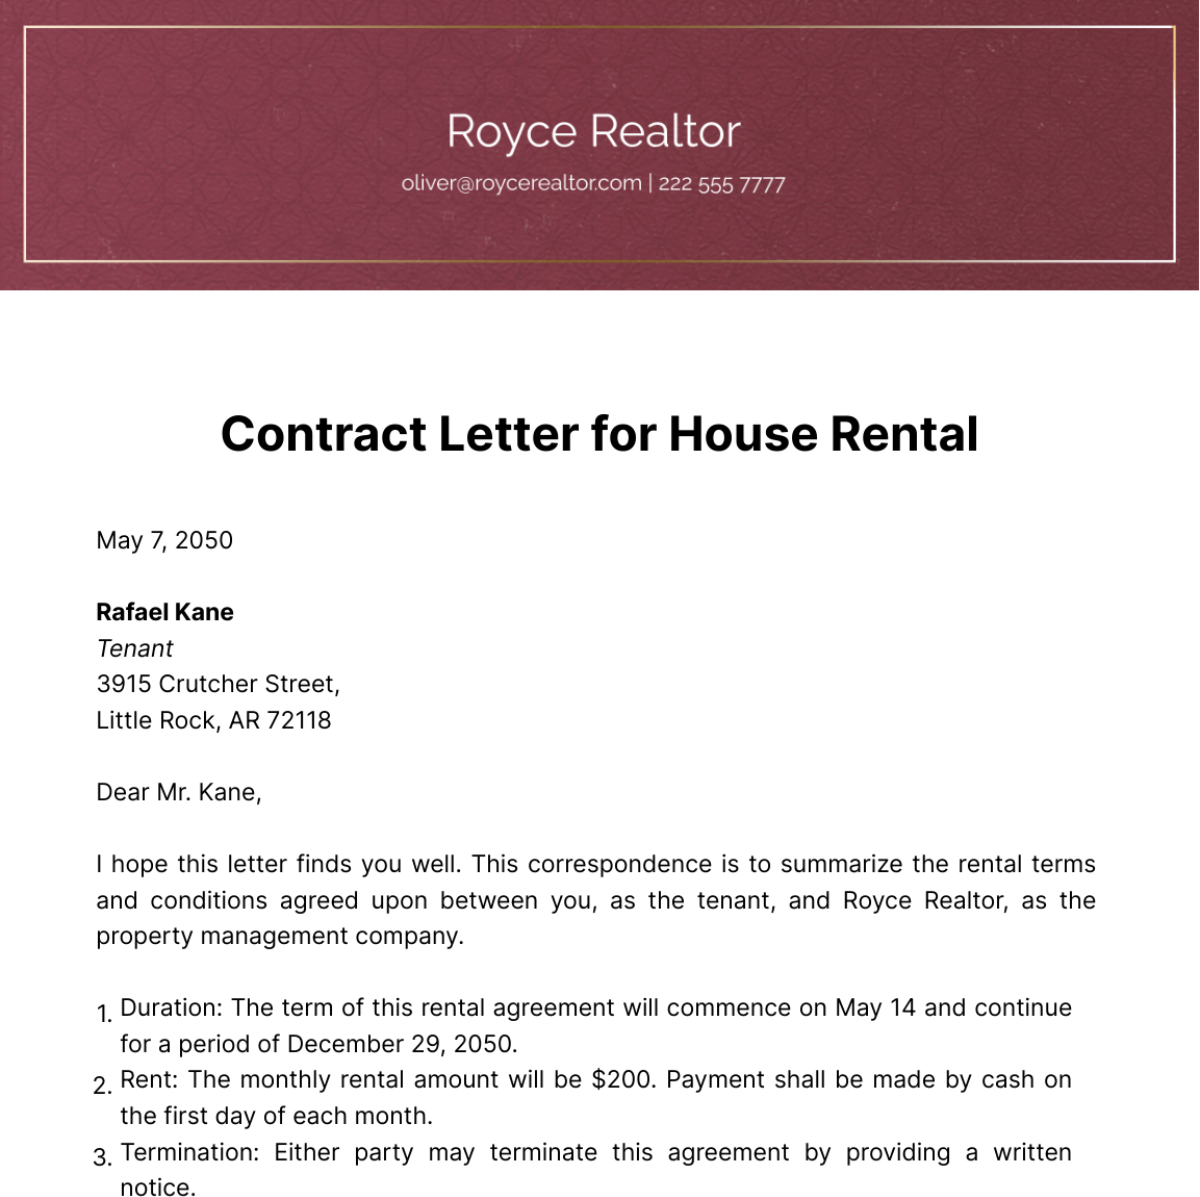 Free Contract Letter for House Rental   Template